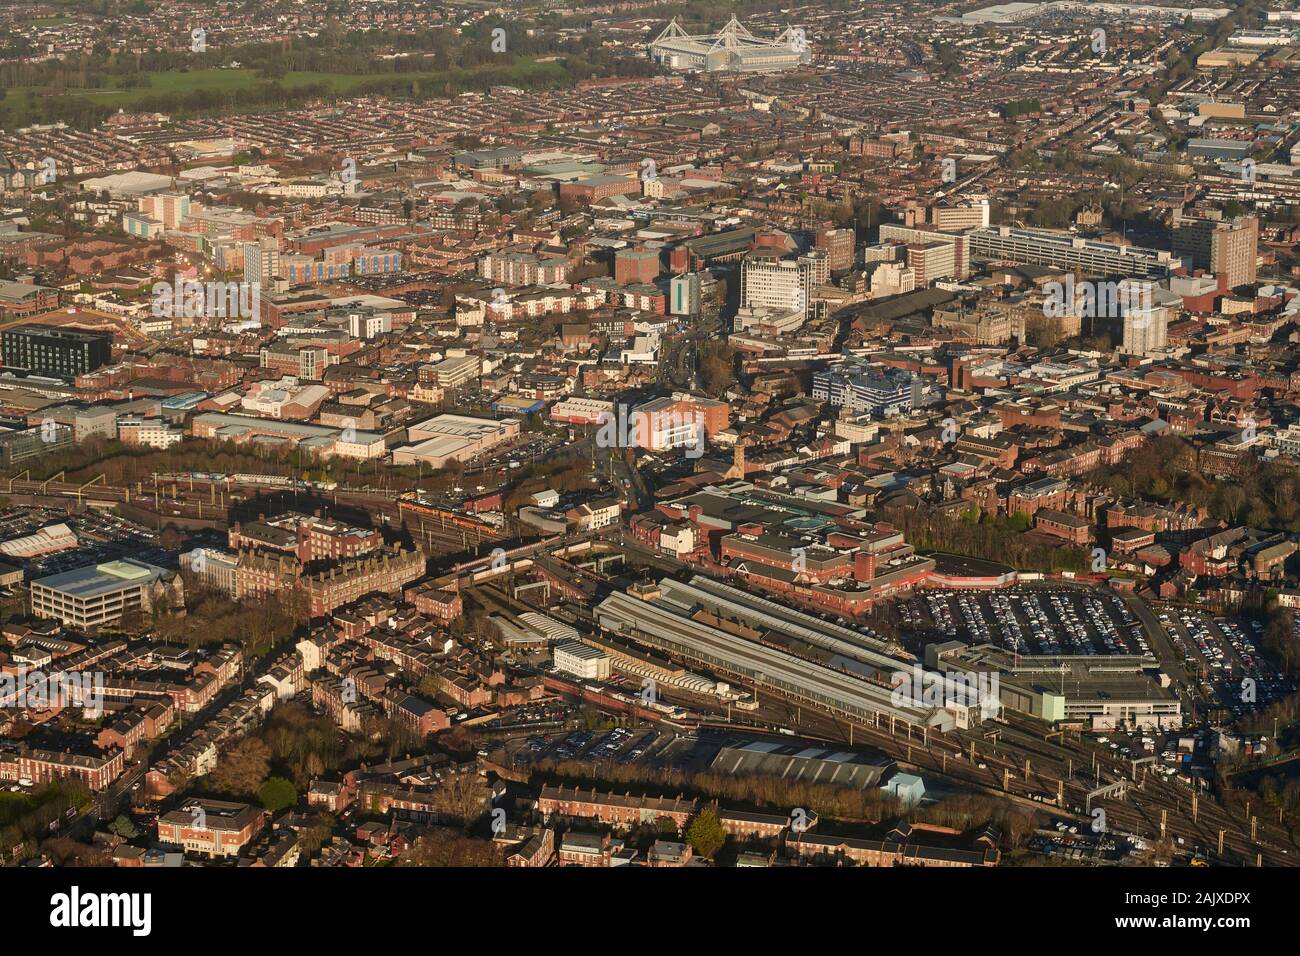 An aerial view of Preston city centre, railway station foreground, north west England, UK Stock Photo